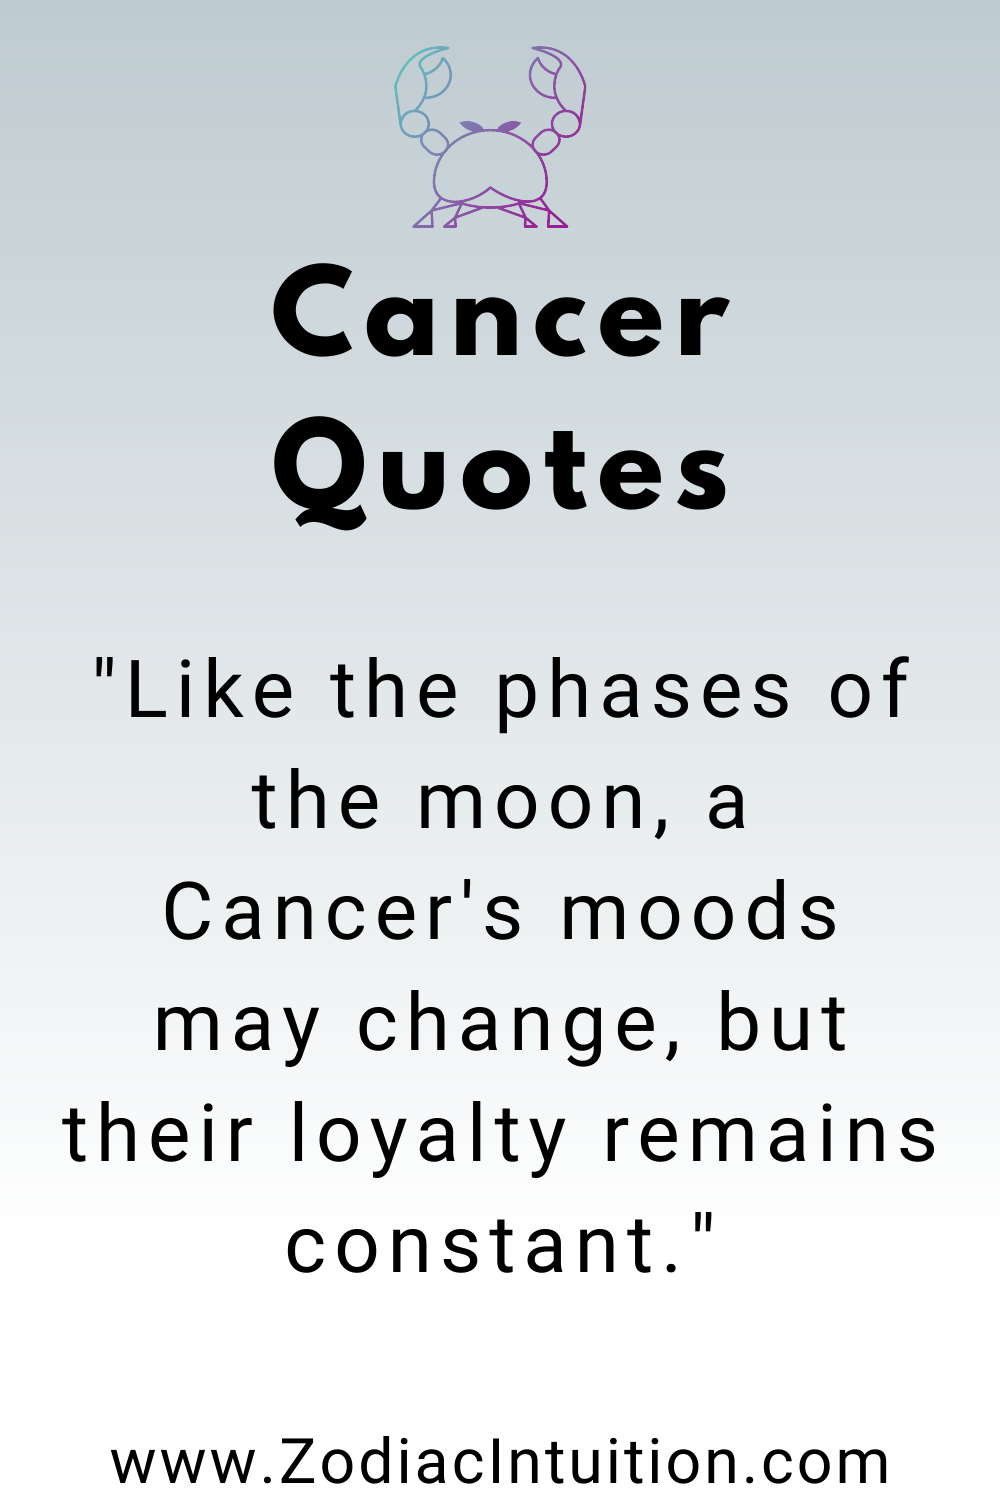 Top 5 Cancer Quotes And Inspiration